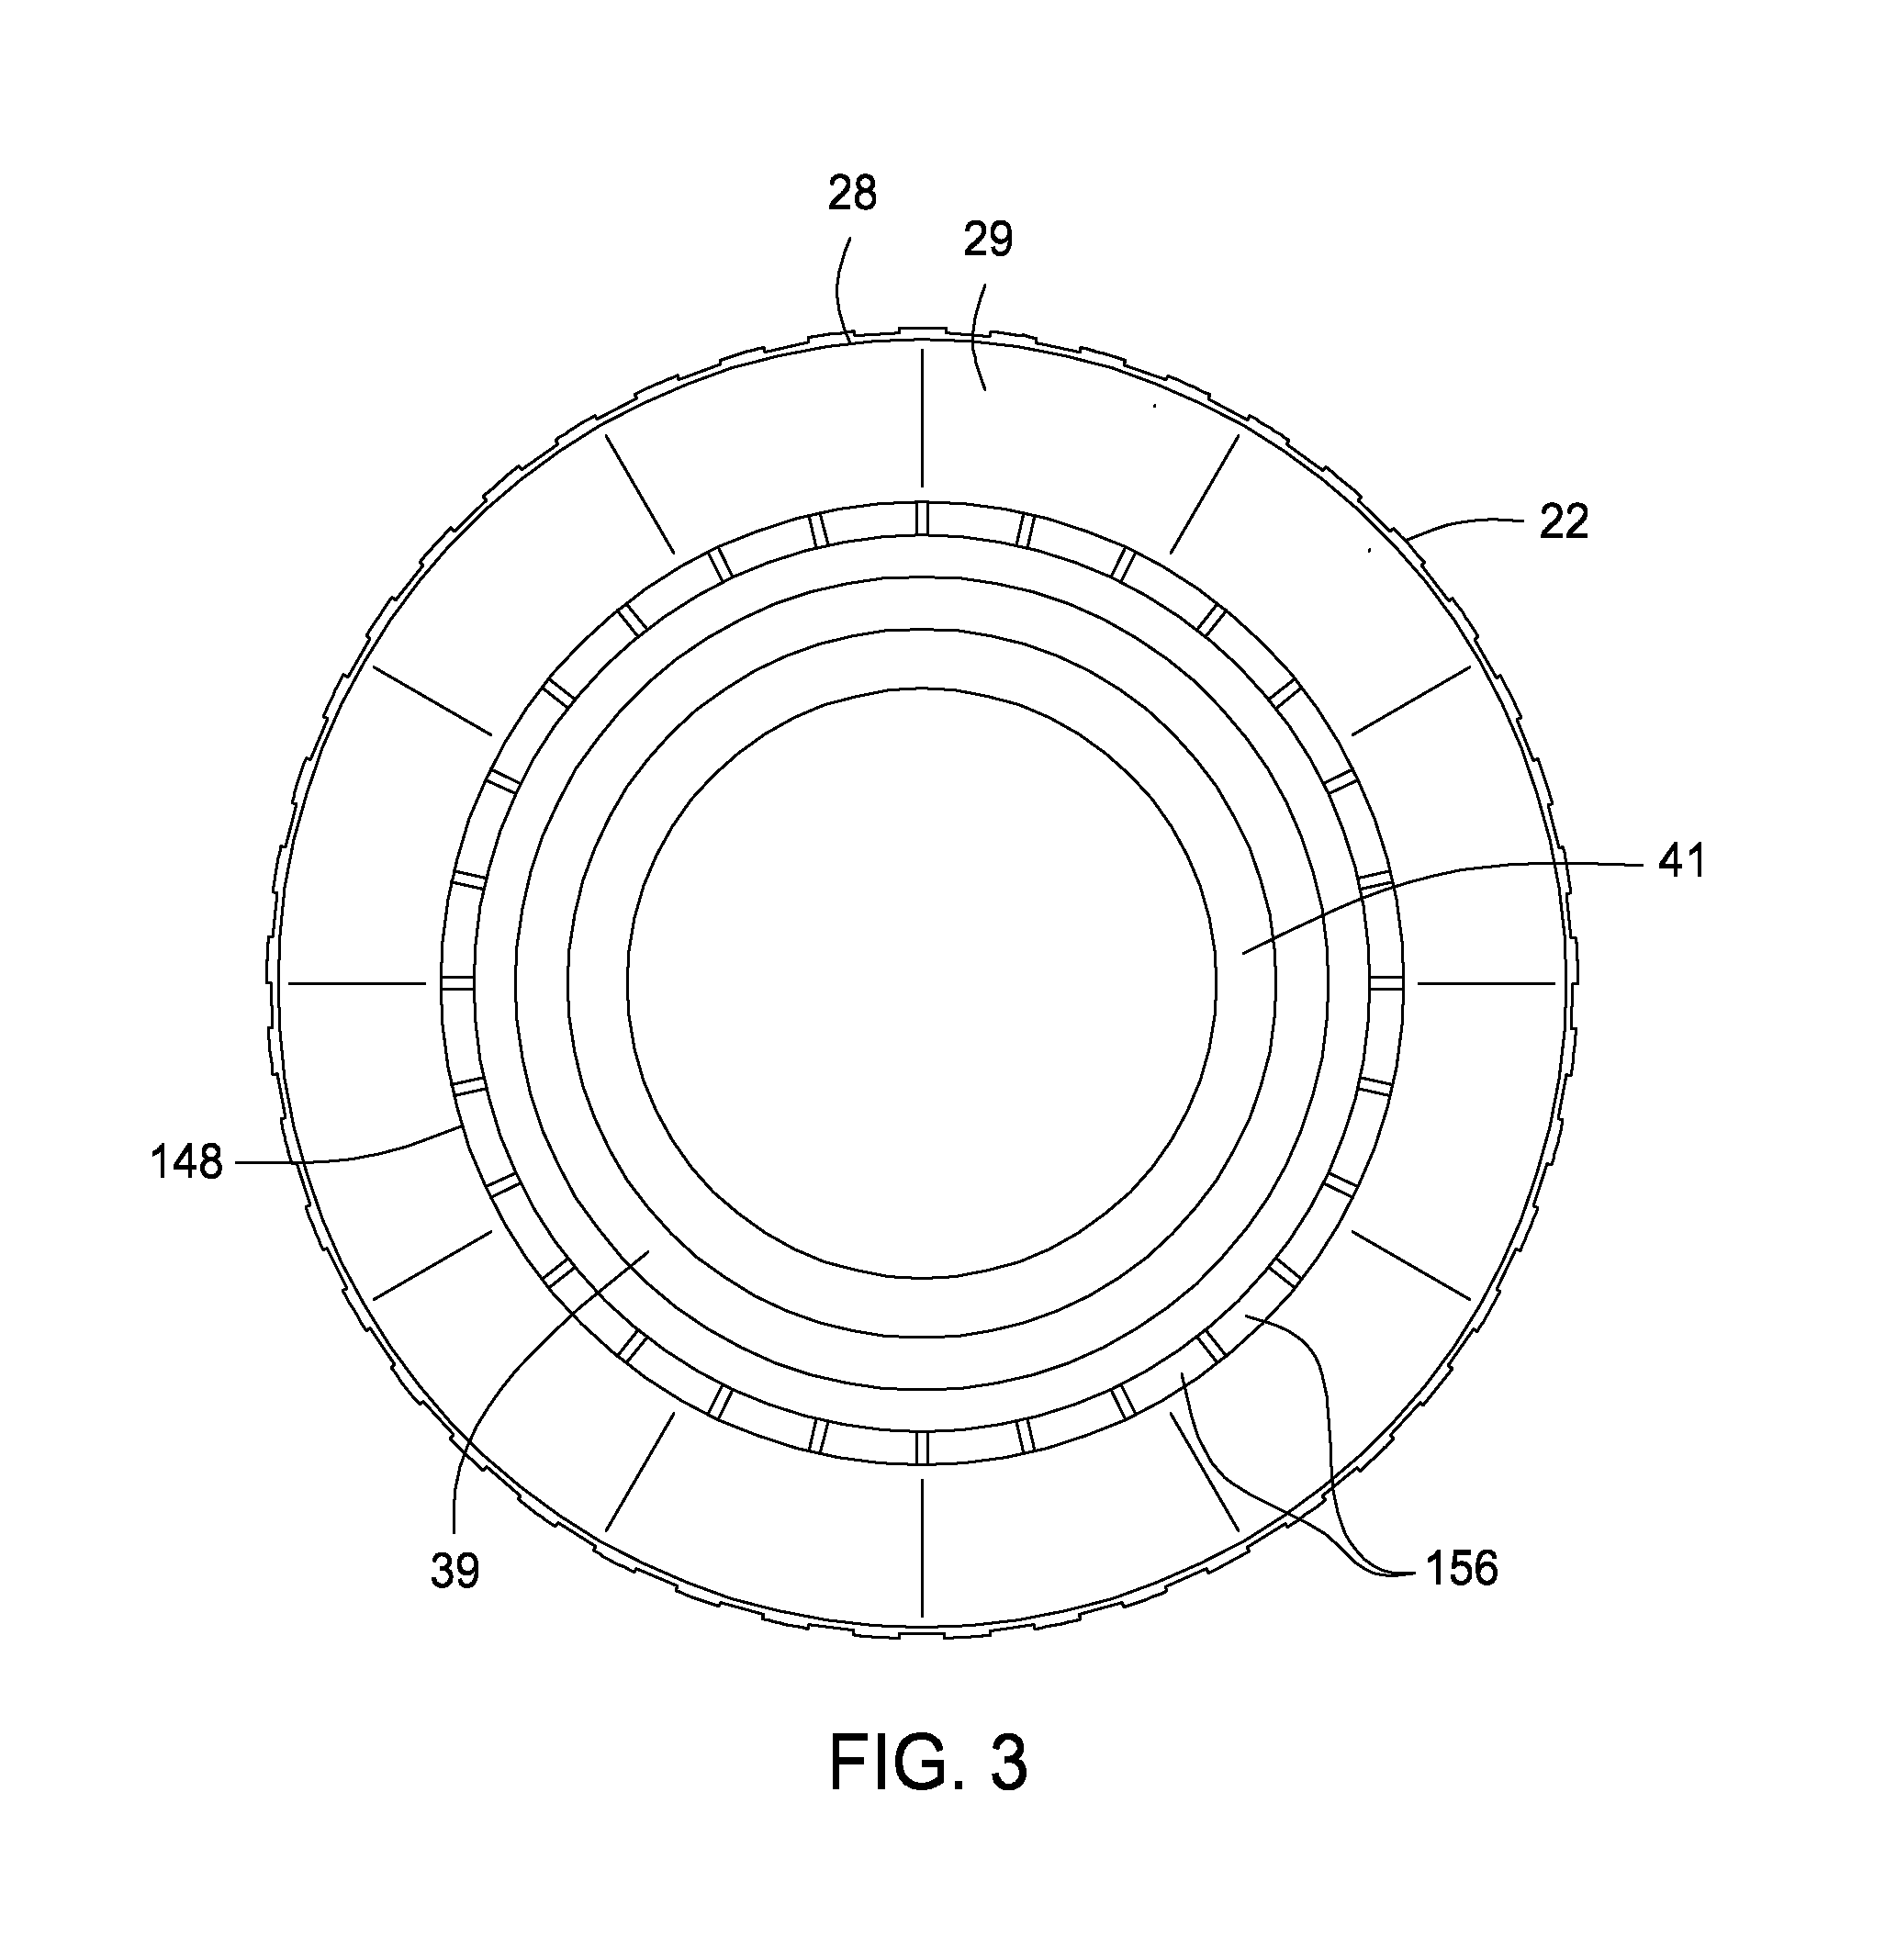 Firearm sound and flash suppressor having low pressure discharge